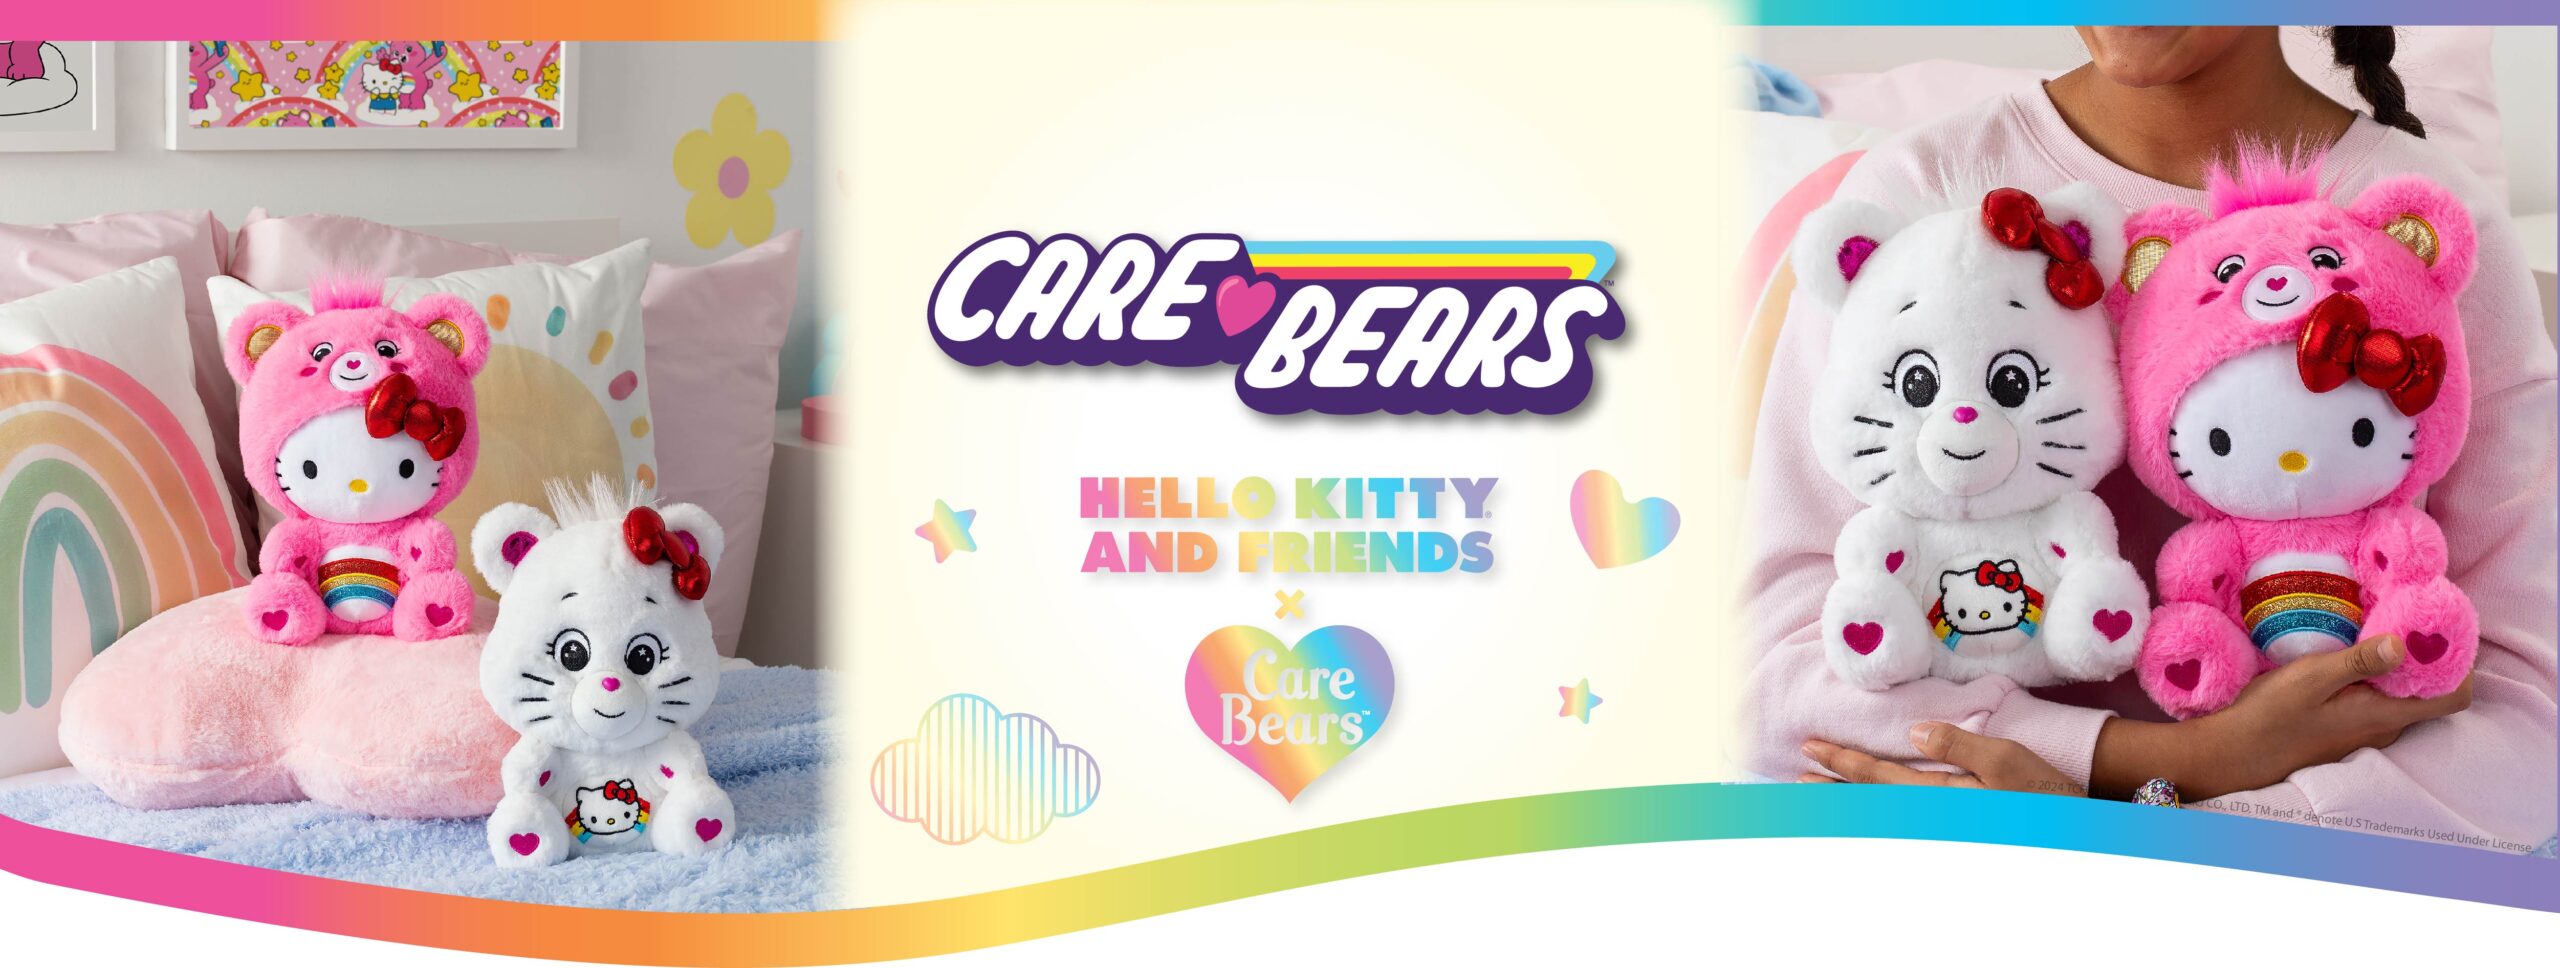 Care Bears Hello Kitty and Friends